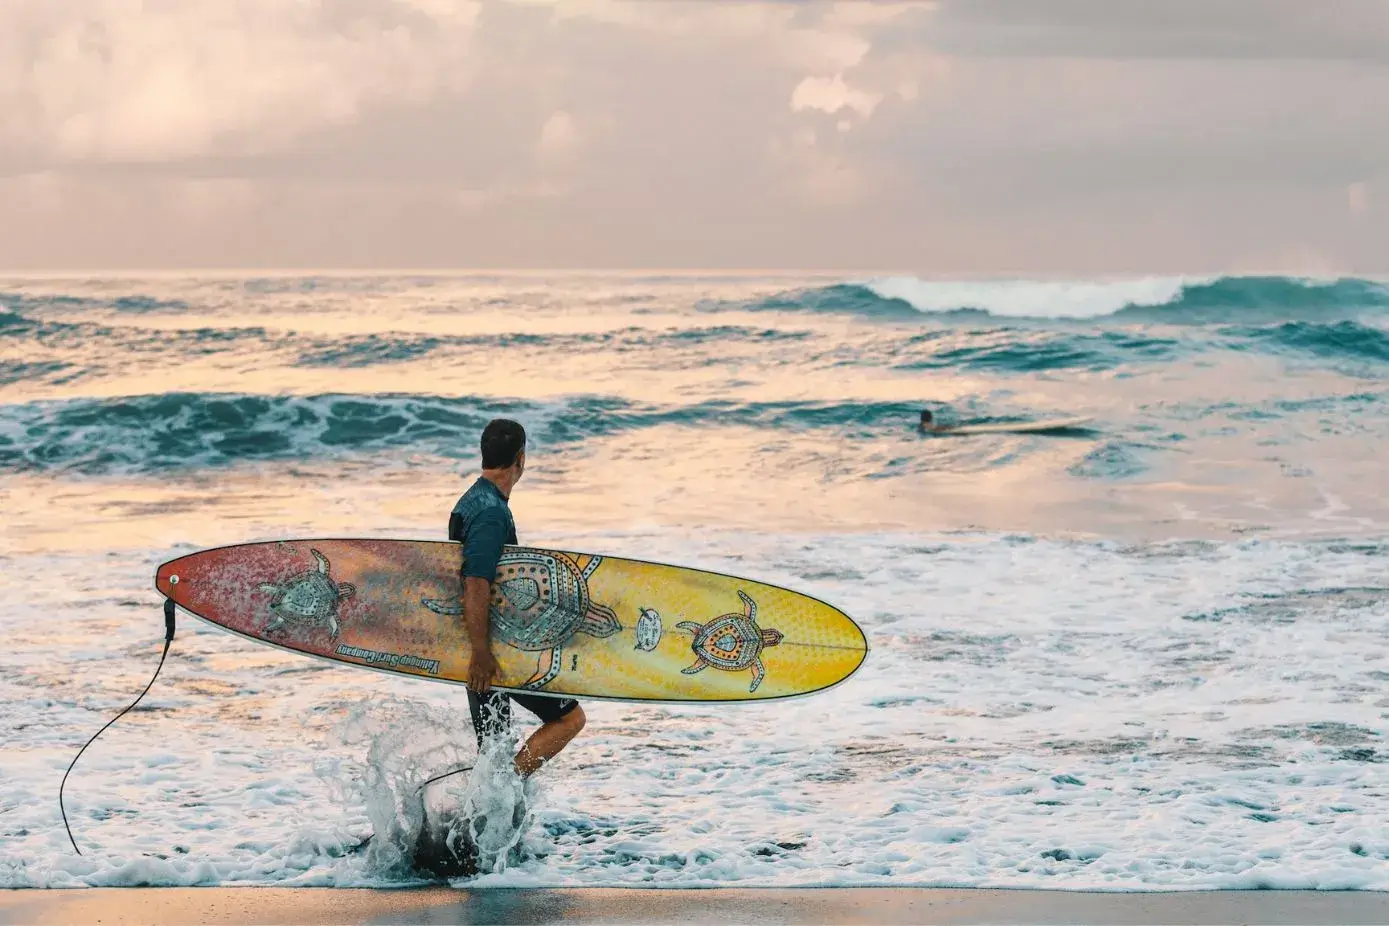 13 Best Things To Do In Bali - Surfing in Bali